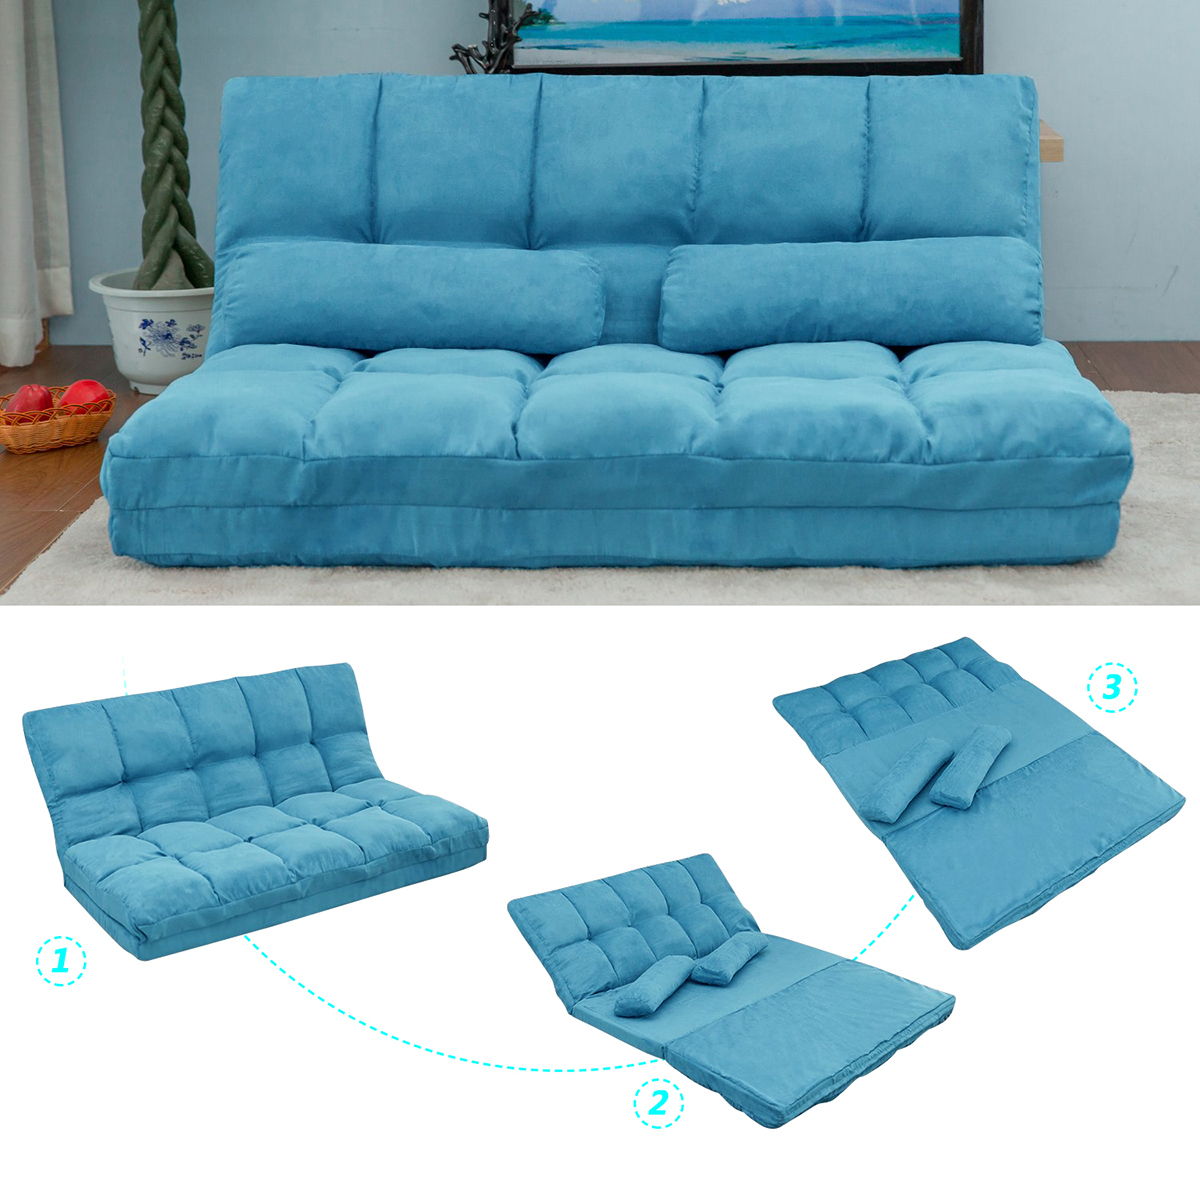 Double Chaise Lounge Sofa Floor Couch And Sofa With Two Pillows - Blue